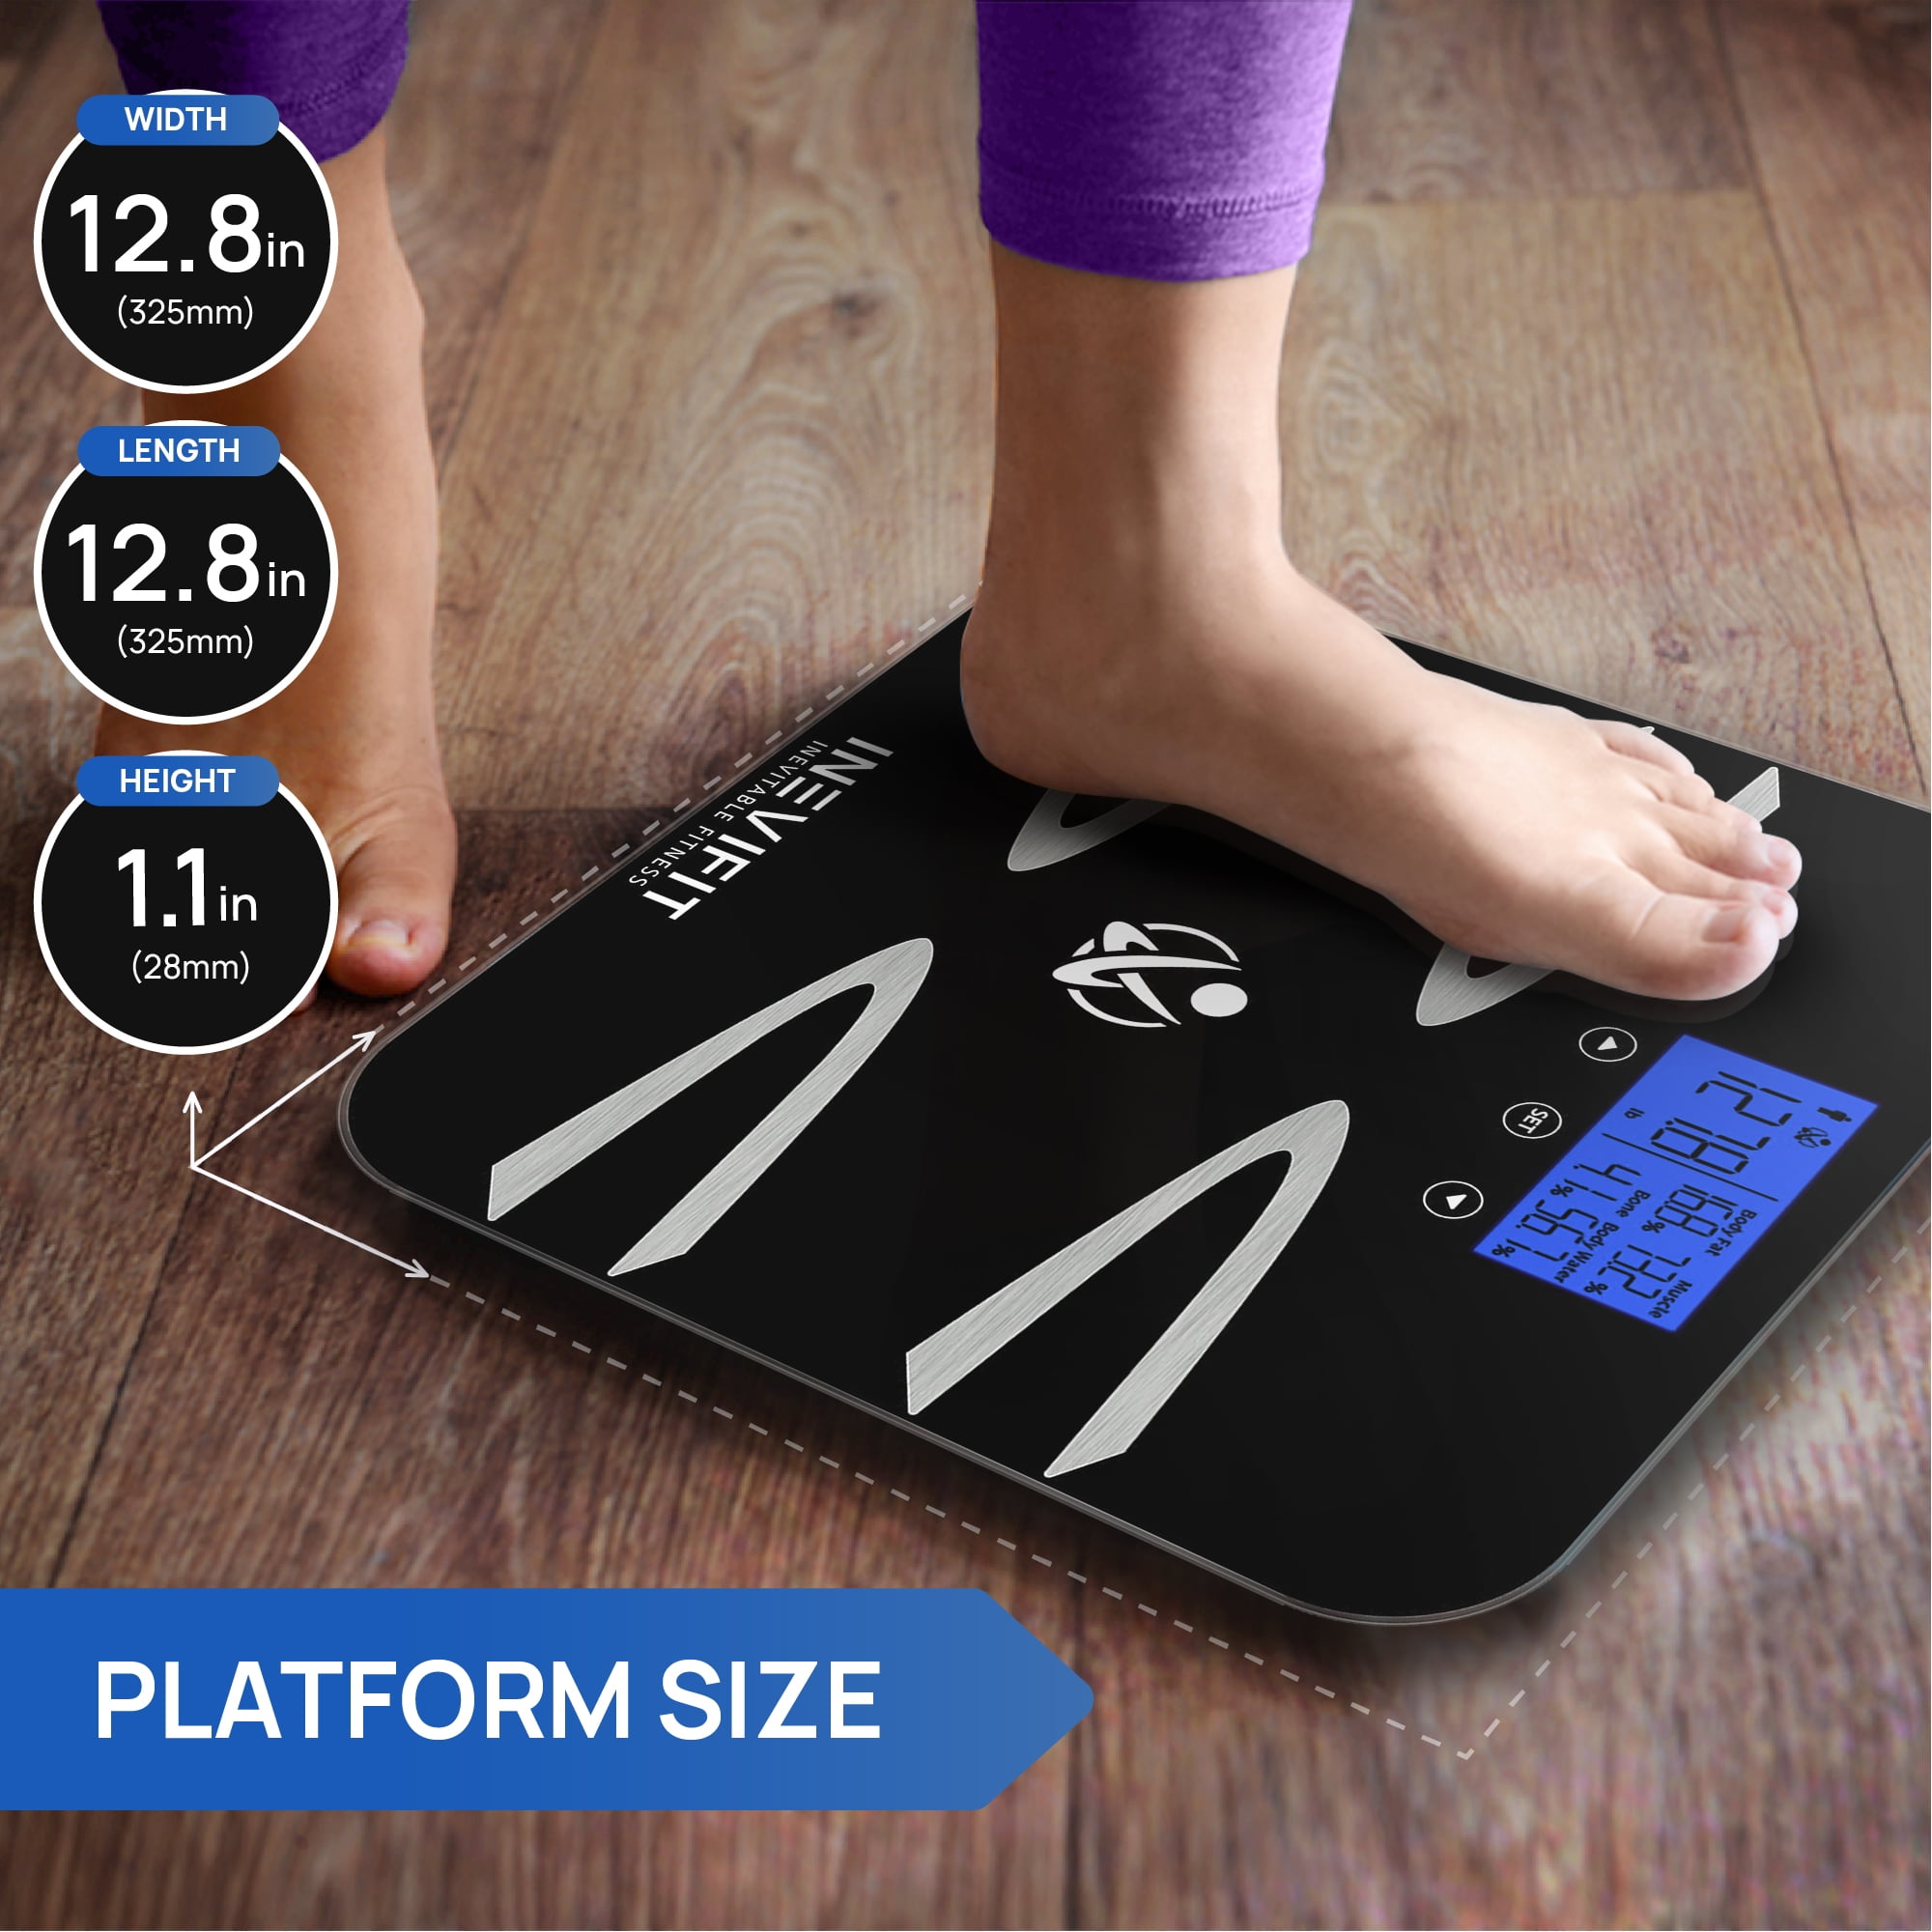 INEVIFIT Body Fat Scale, Highly Accurate Digital Bathroom Body